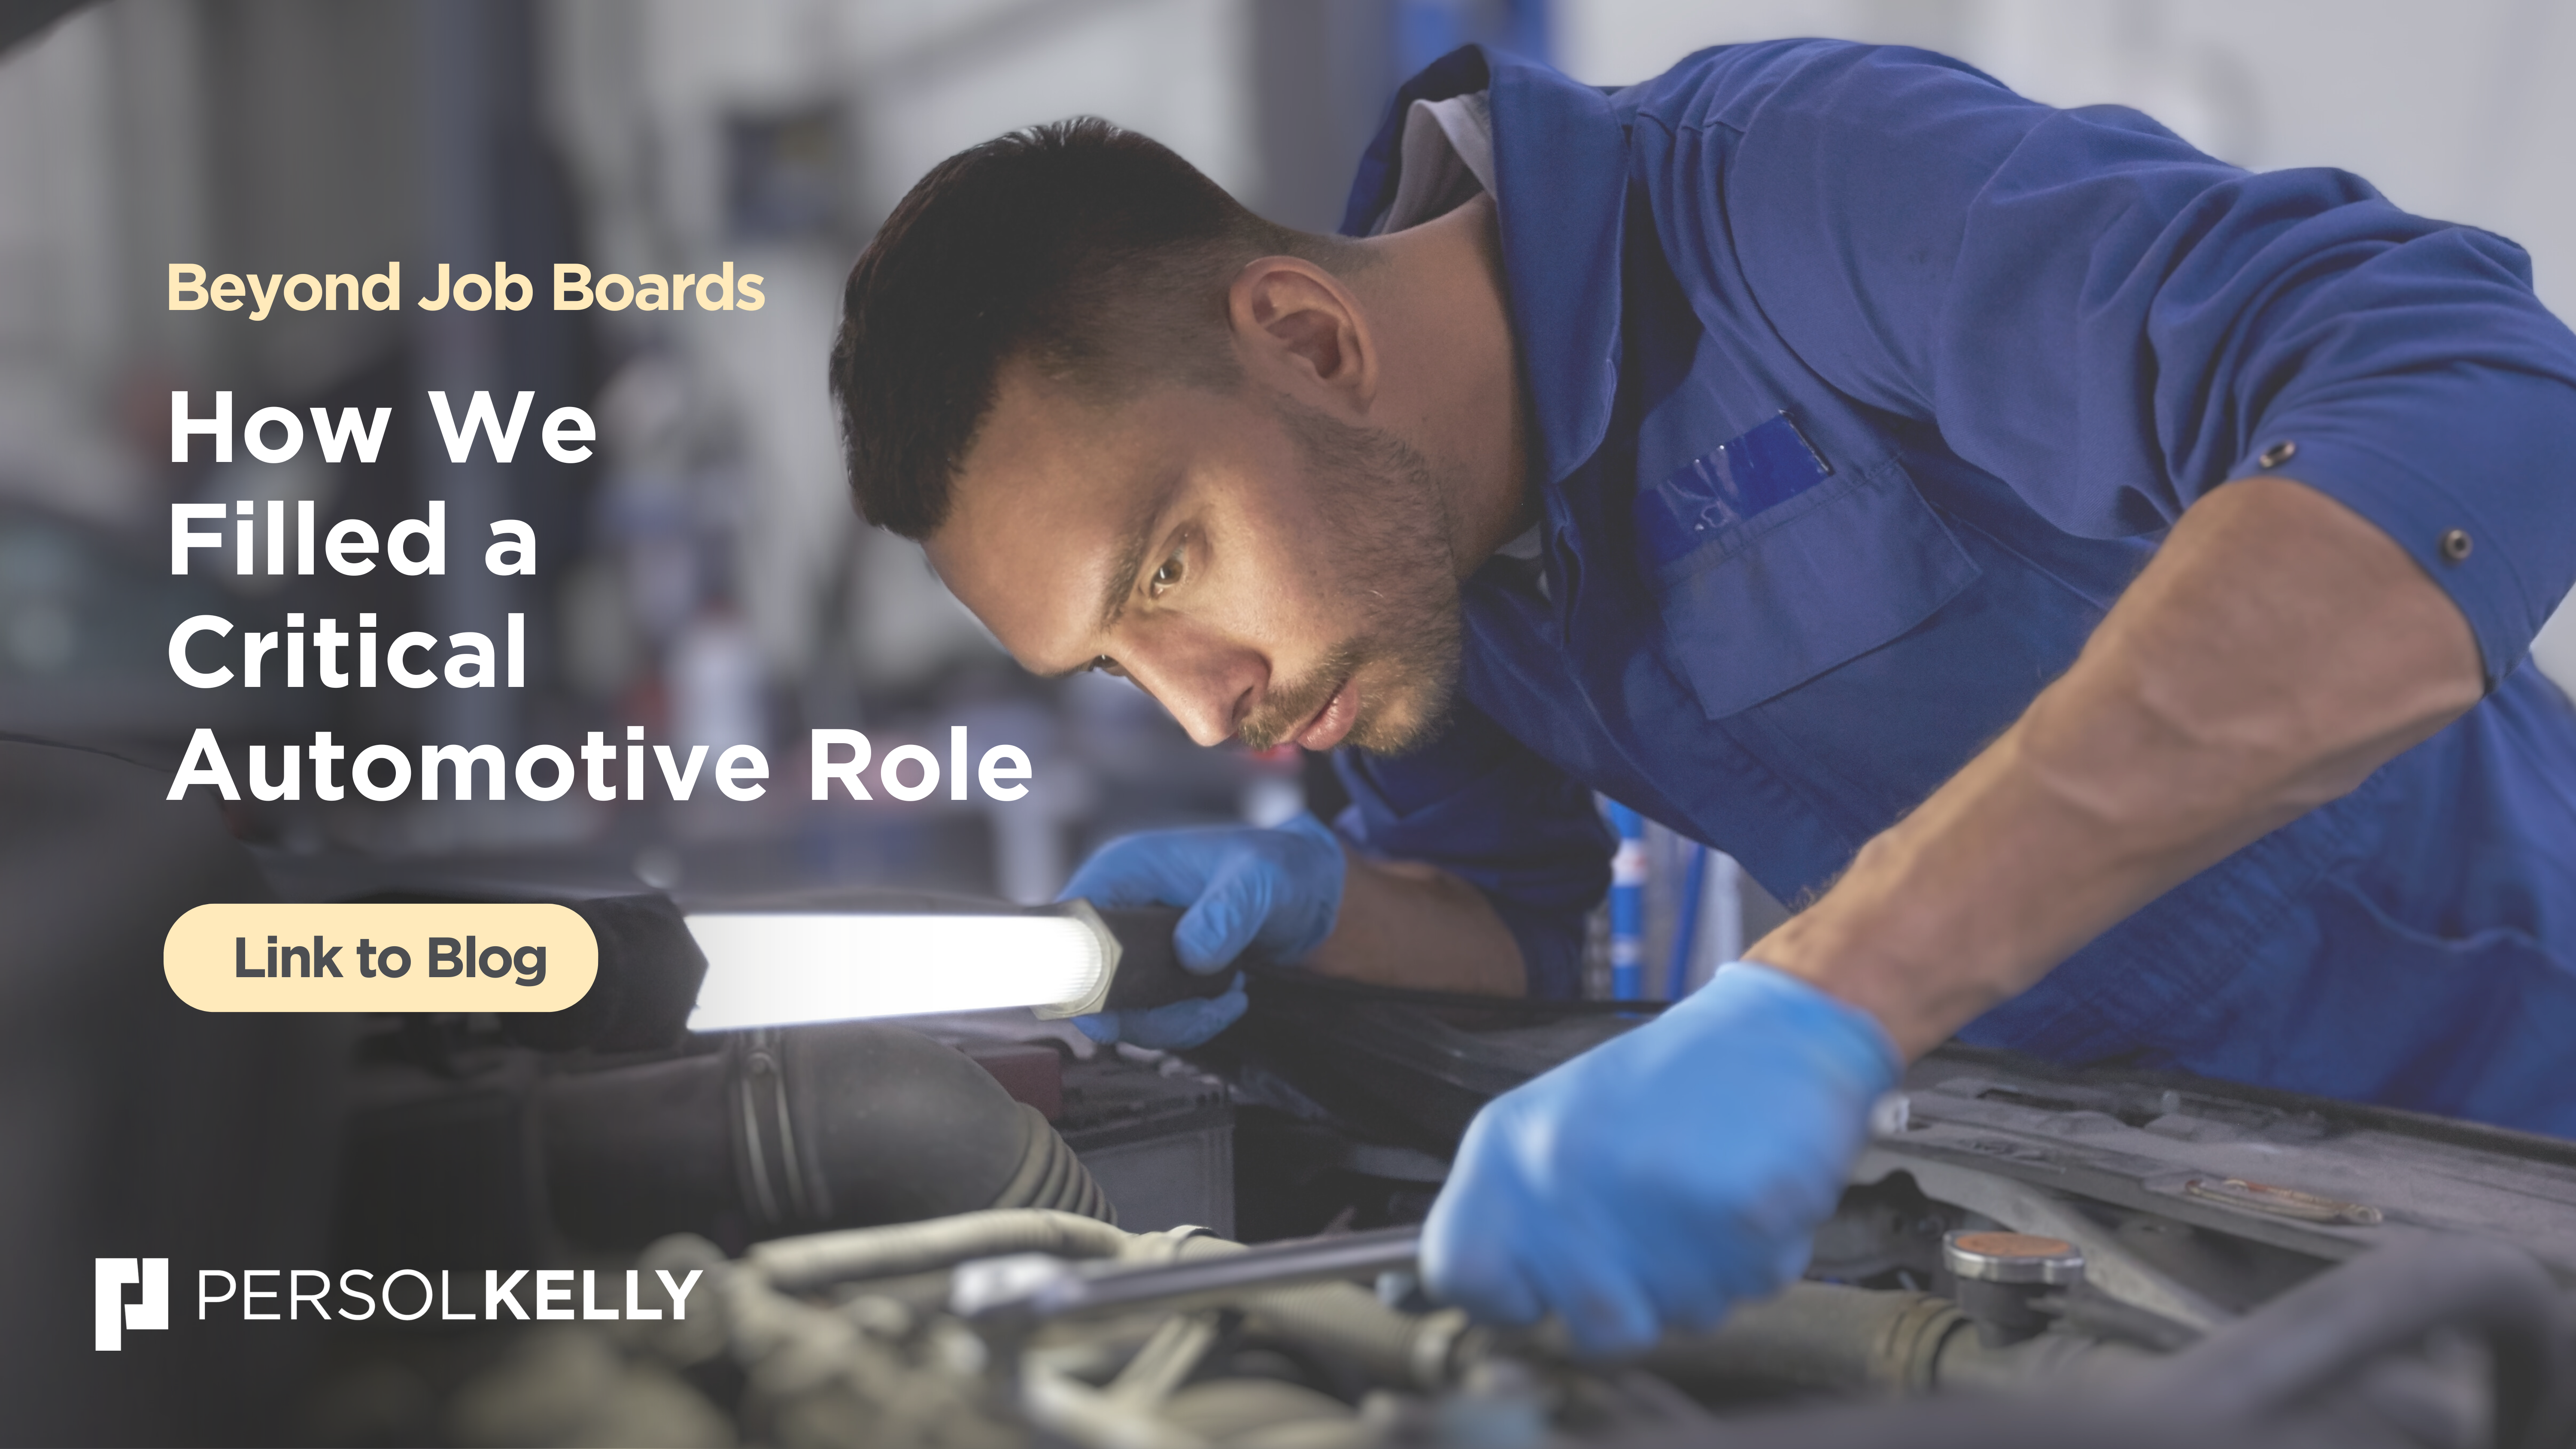 Revolutionizing Talent Acquisition in the Automotive Industry: PERSOLKELLY's Multi-Layered Approach